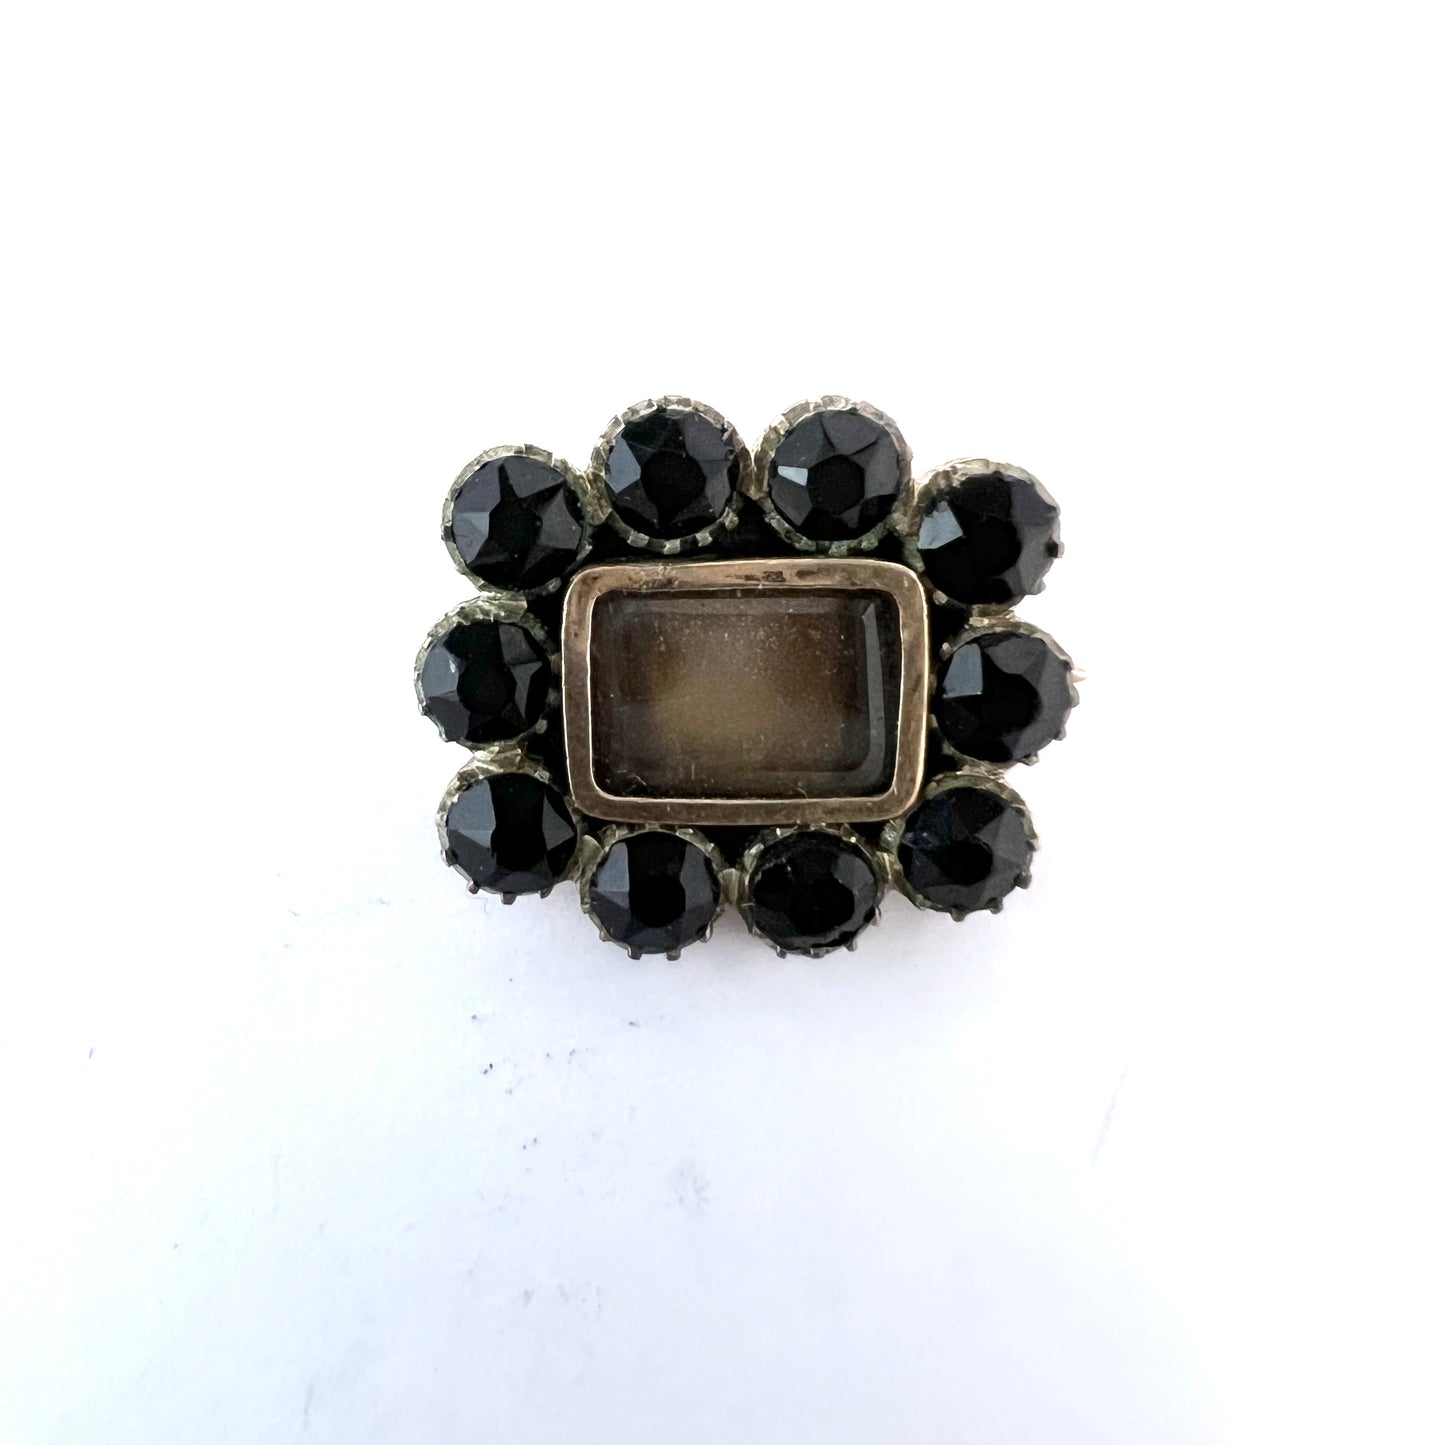 Antique c 1830s Gilt Silver French Jet Mourning Brooch.